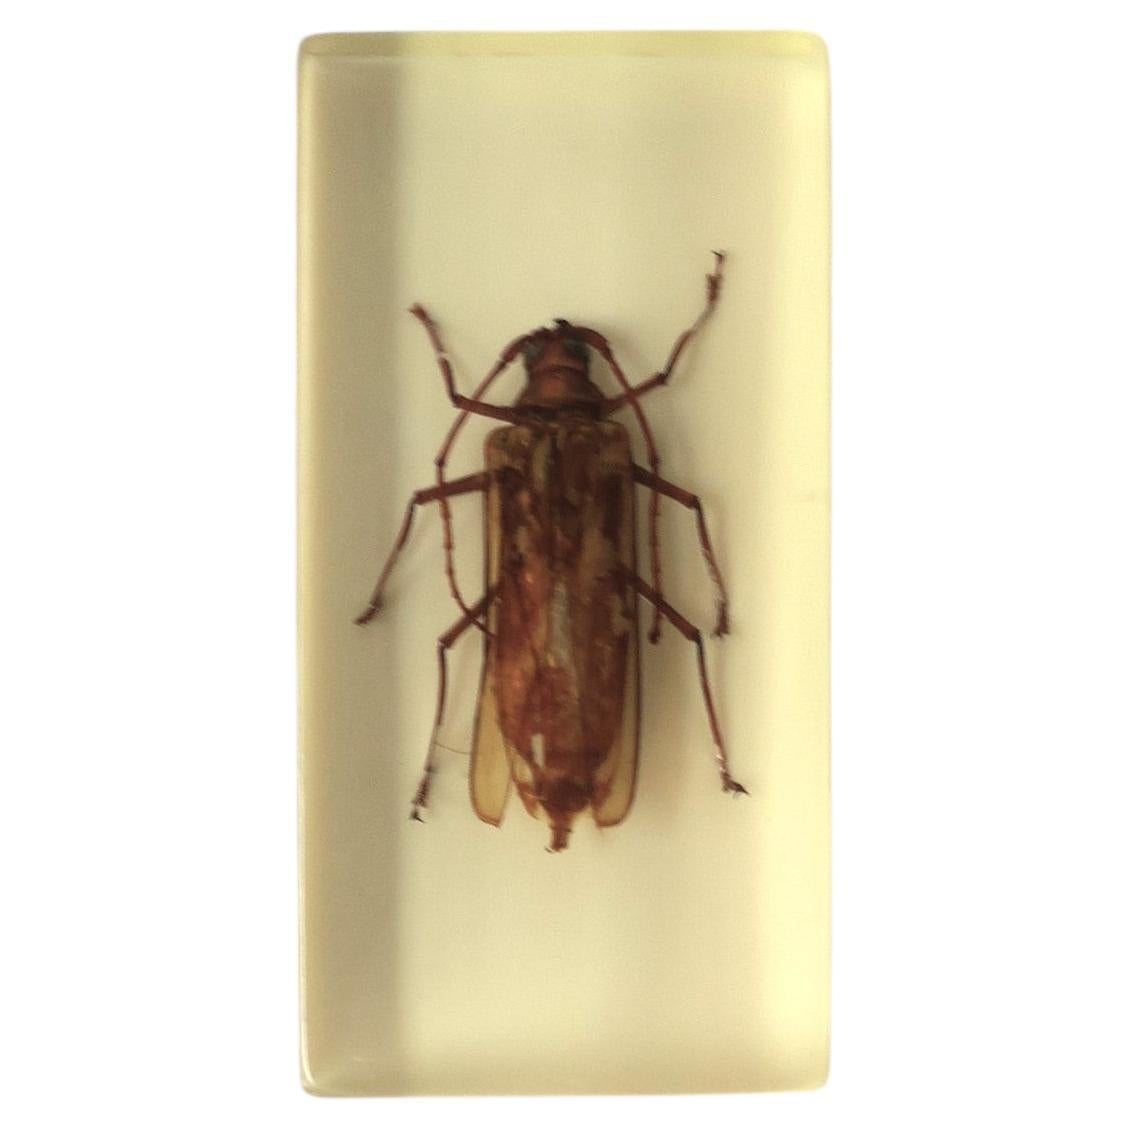 Lucite Encased Insect Bug Decorative Object or Paperweight For Sale